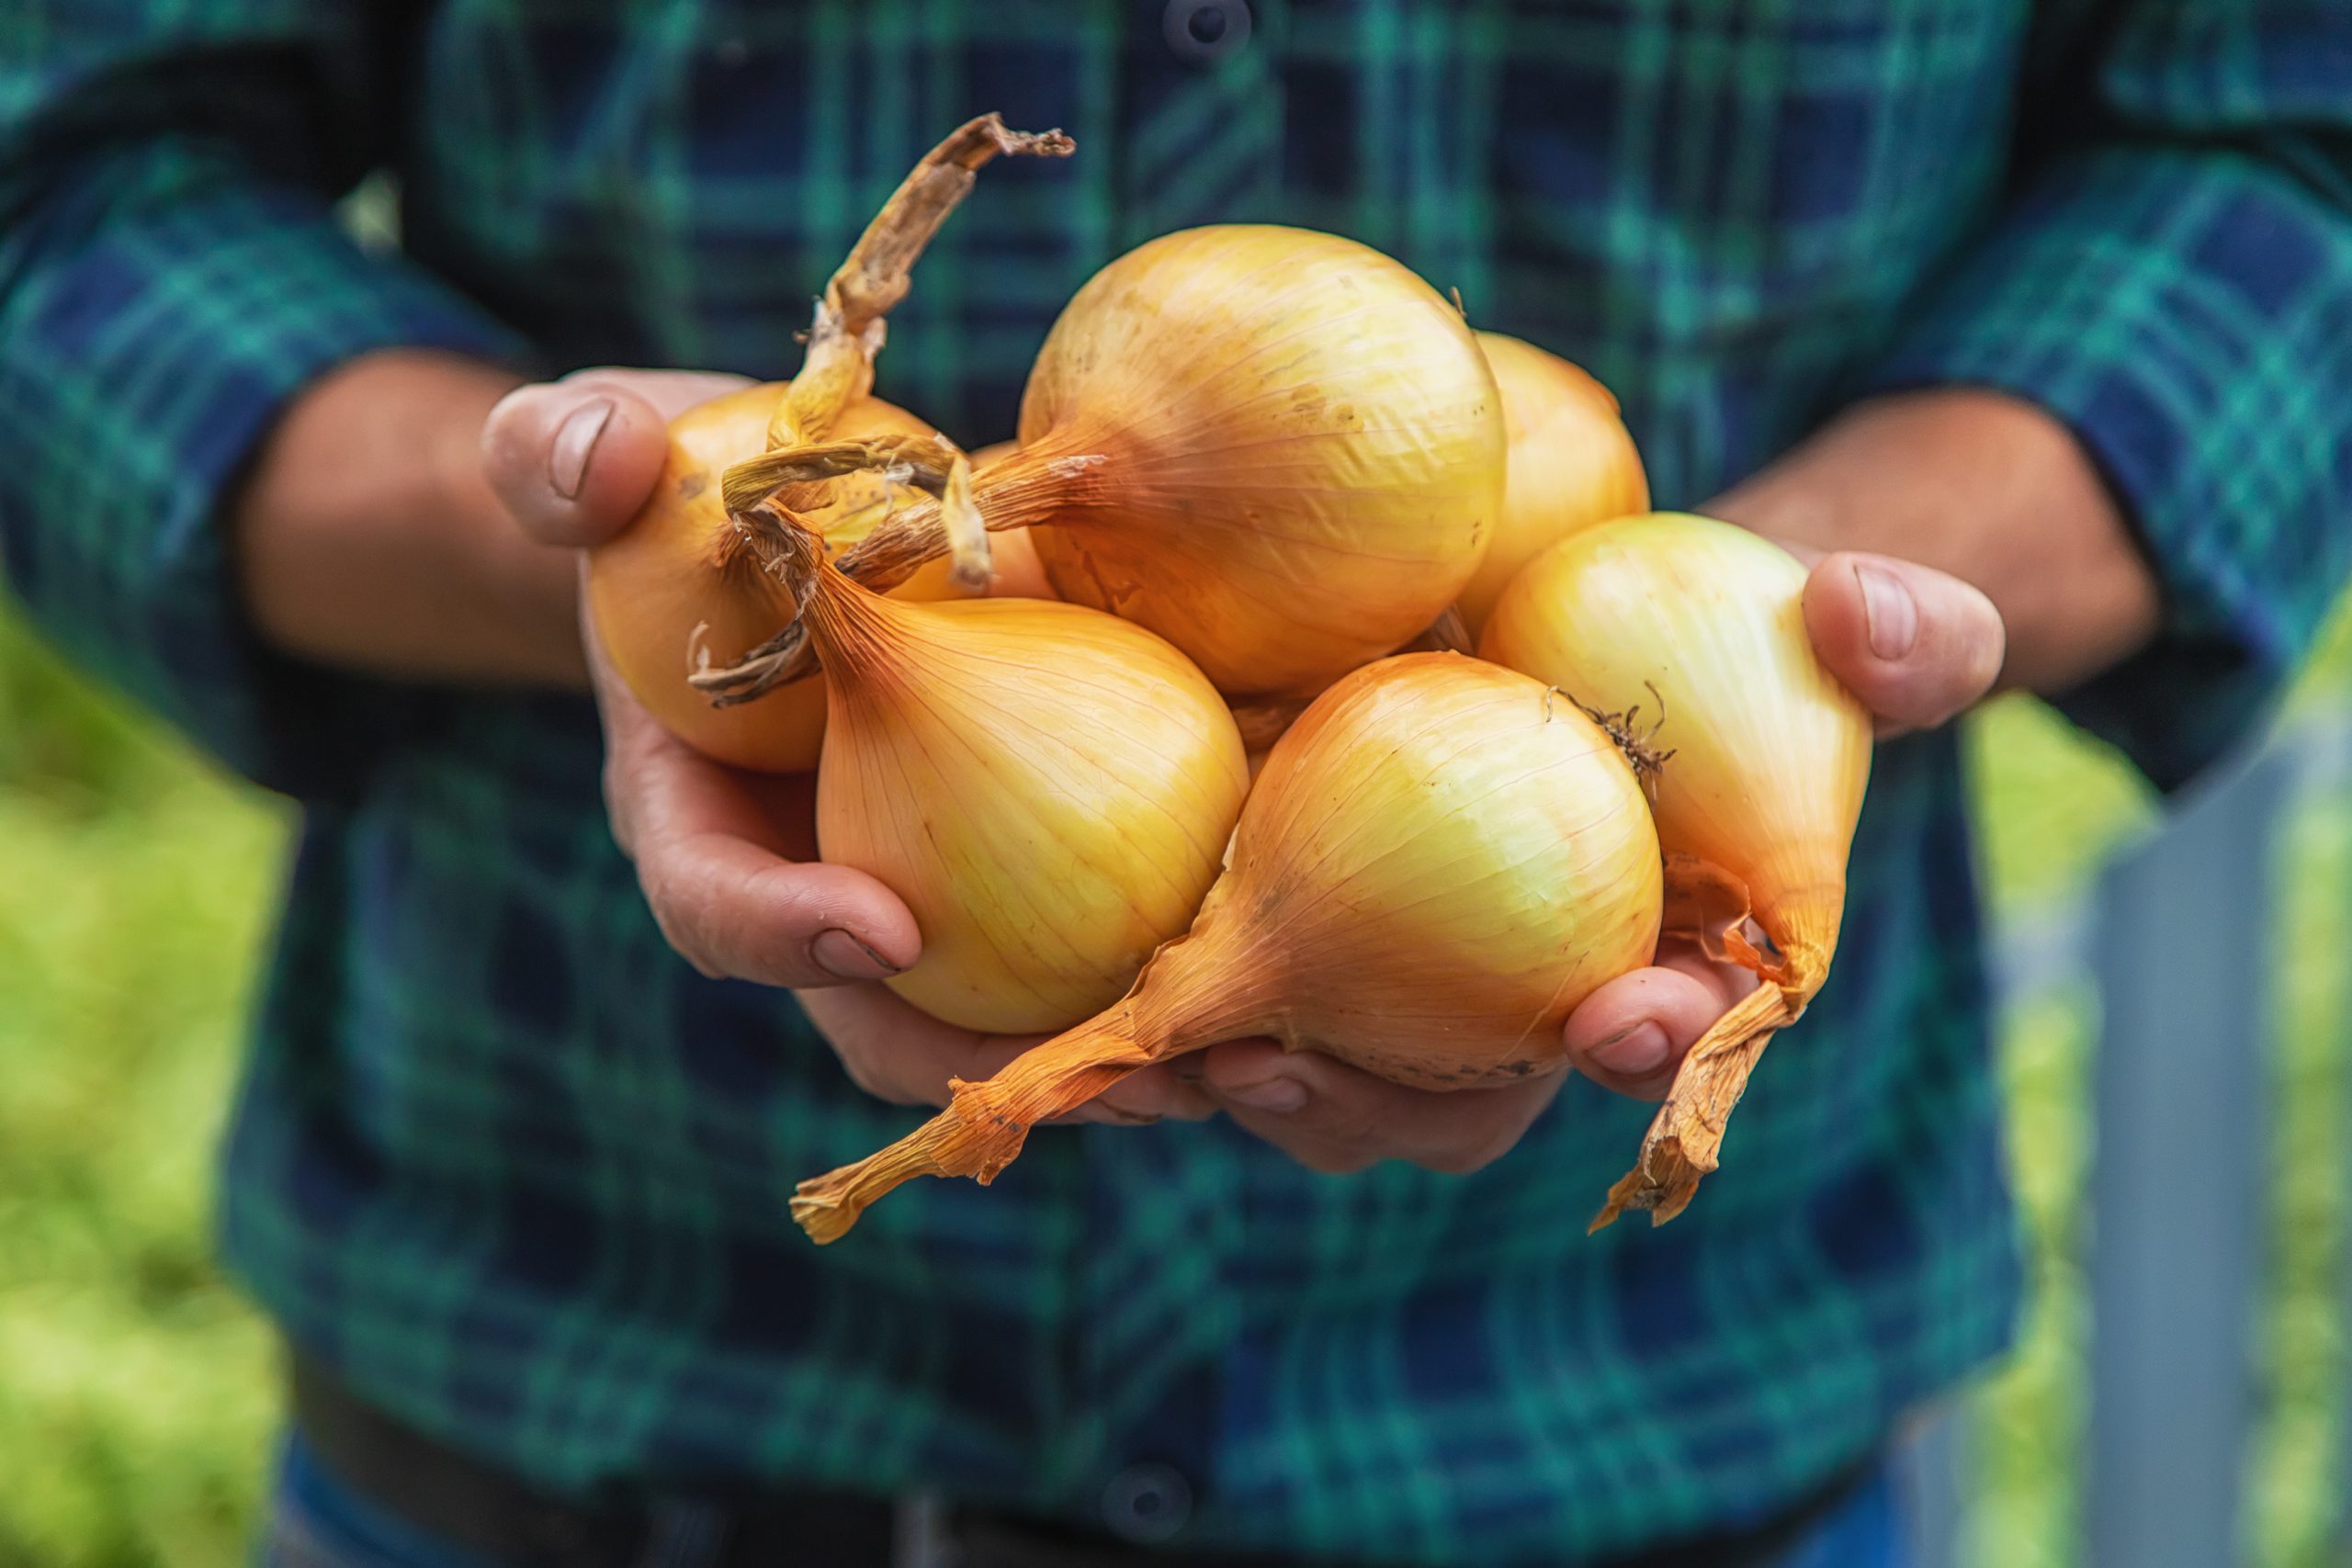 Farmer holding yellow onions between his hands.